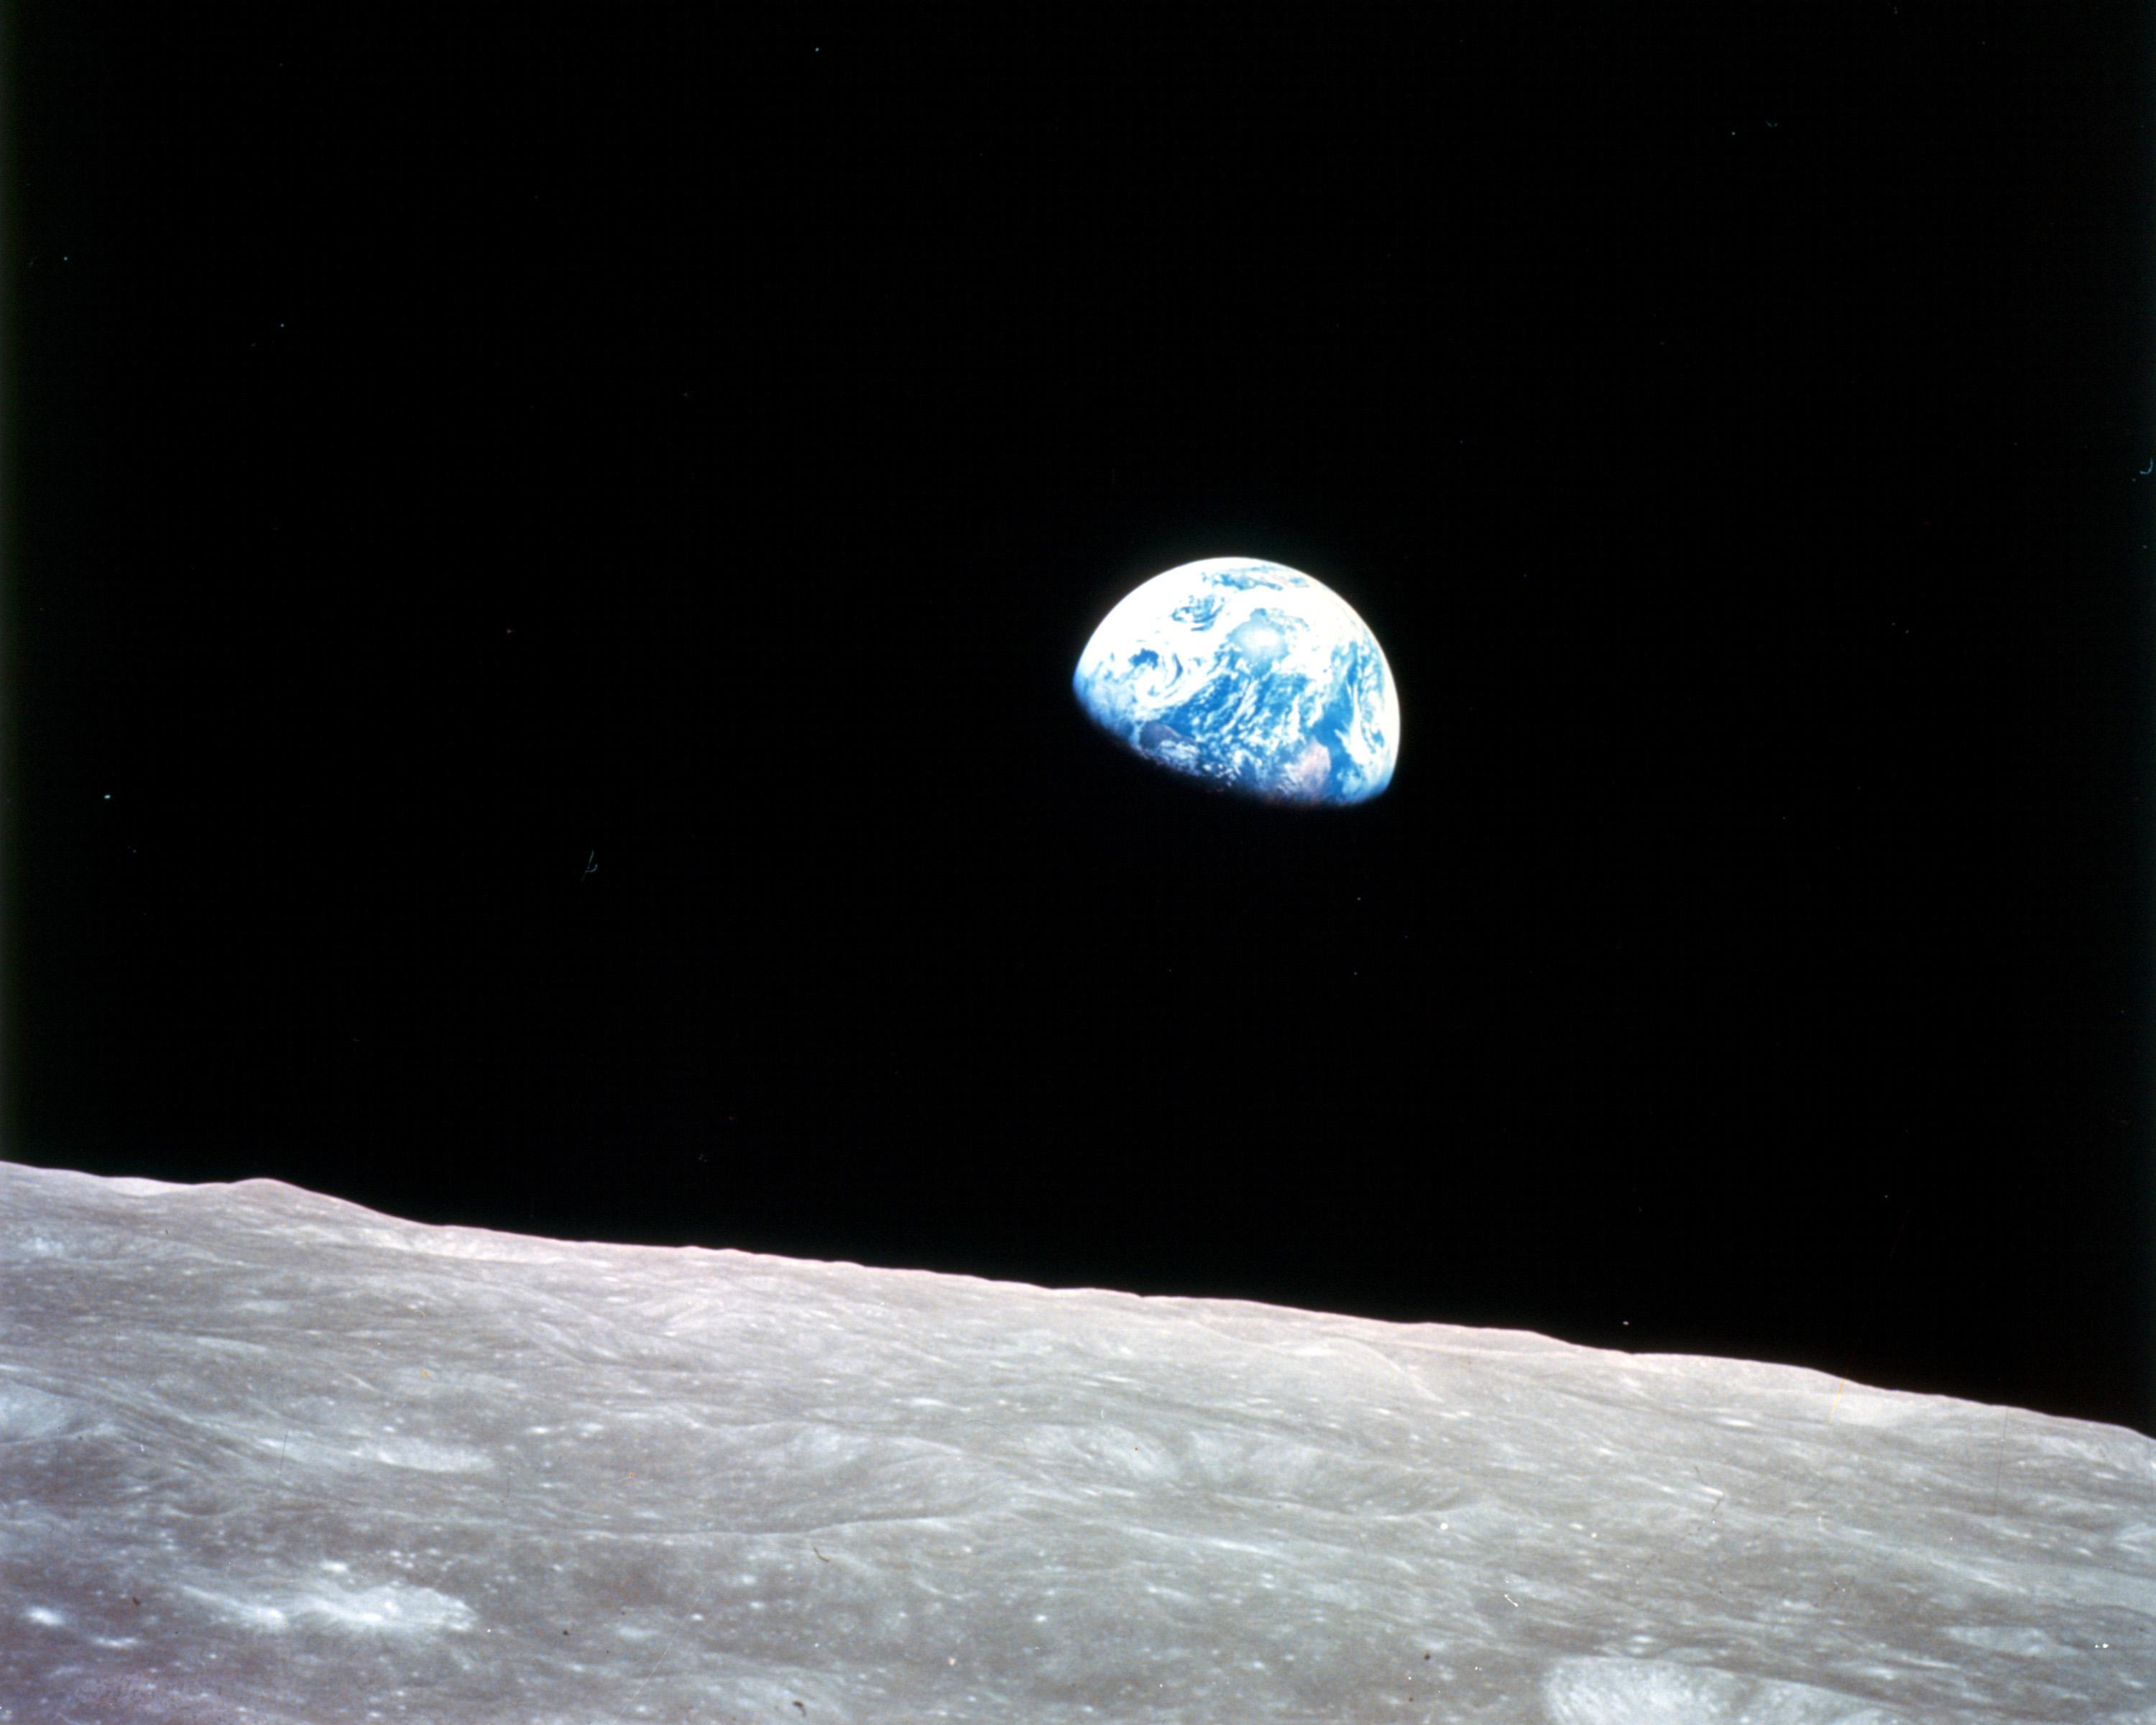 Earth rises above the surface of the moon in the darkness of space